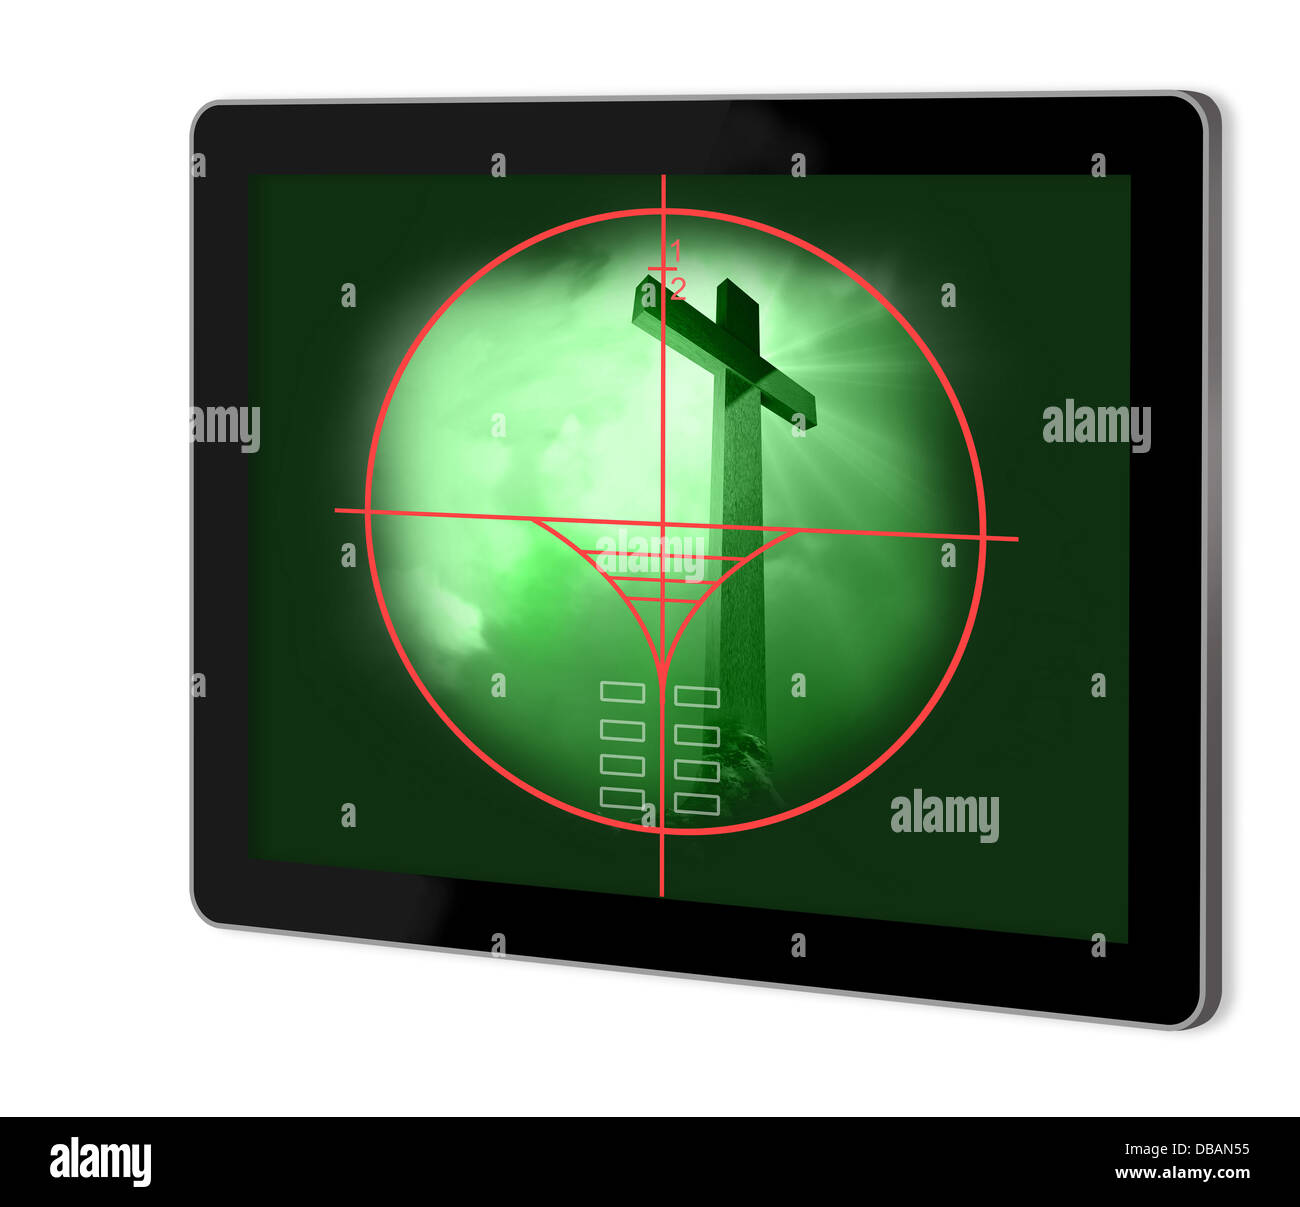 viewfinder of sniper rifle made in 2d software Stock Photo